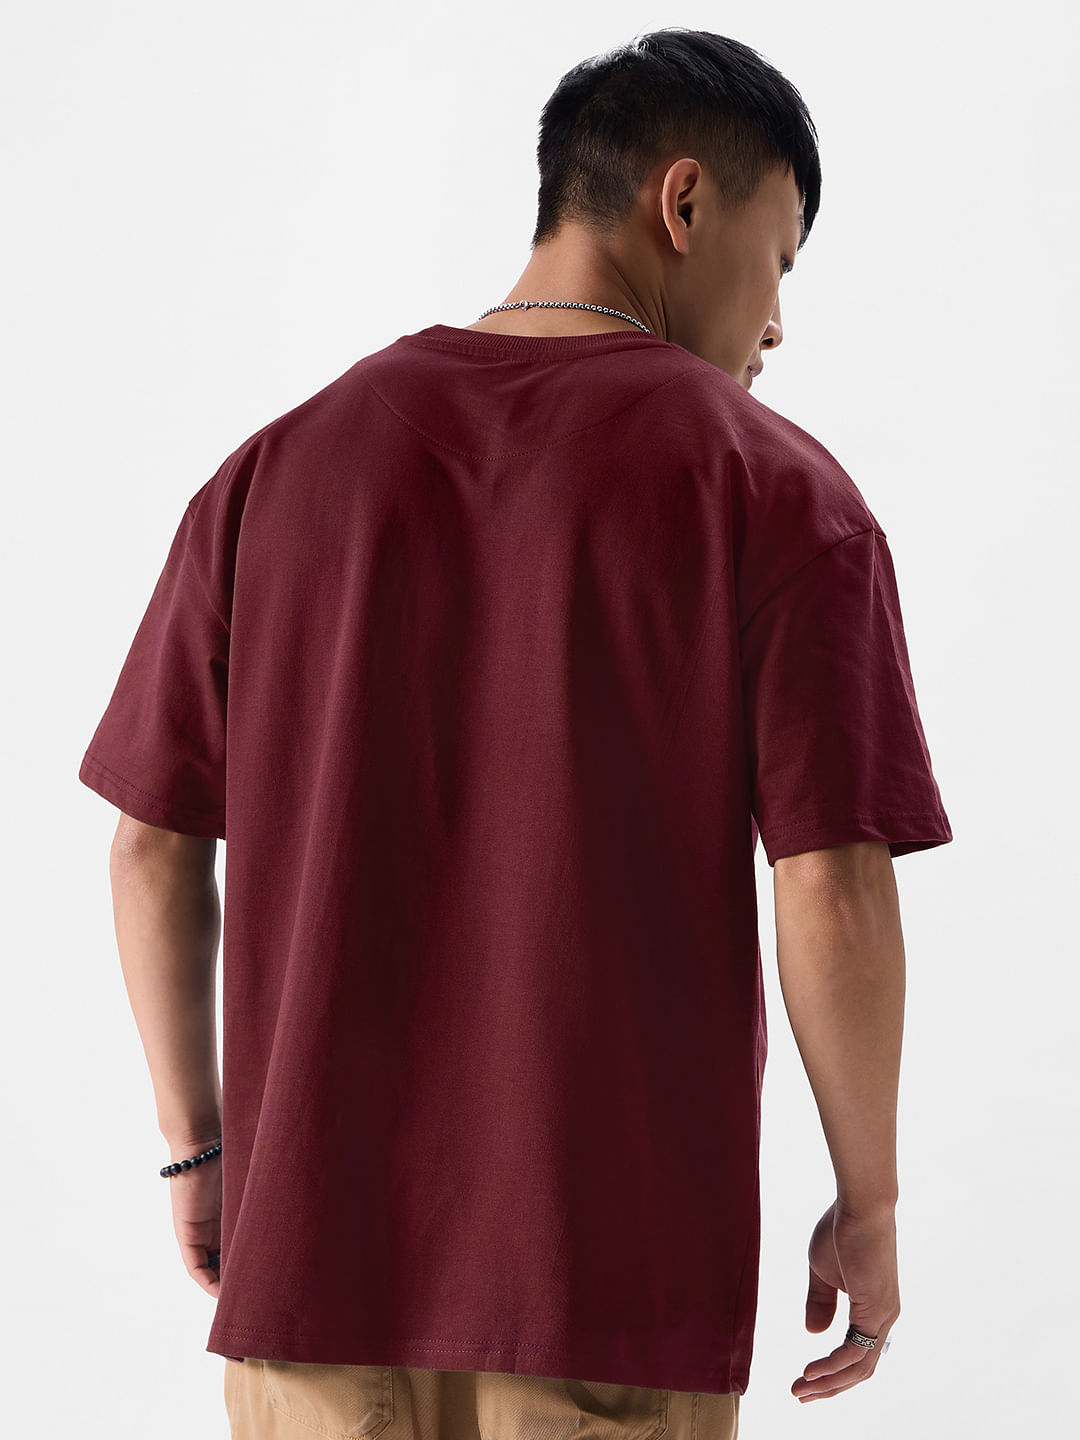 Buy Solids: Burgundy Oversized T-Shirts online at The Souled Store.